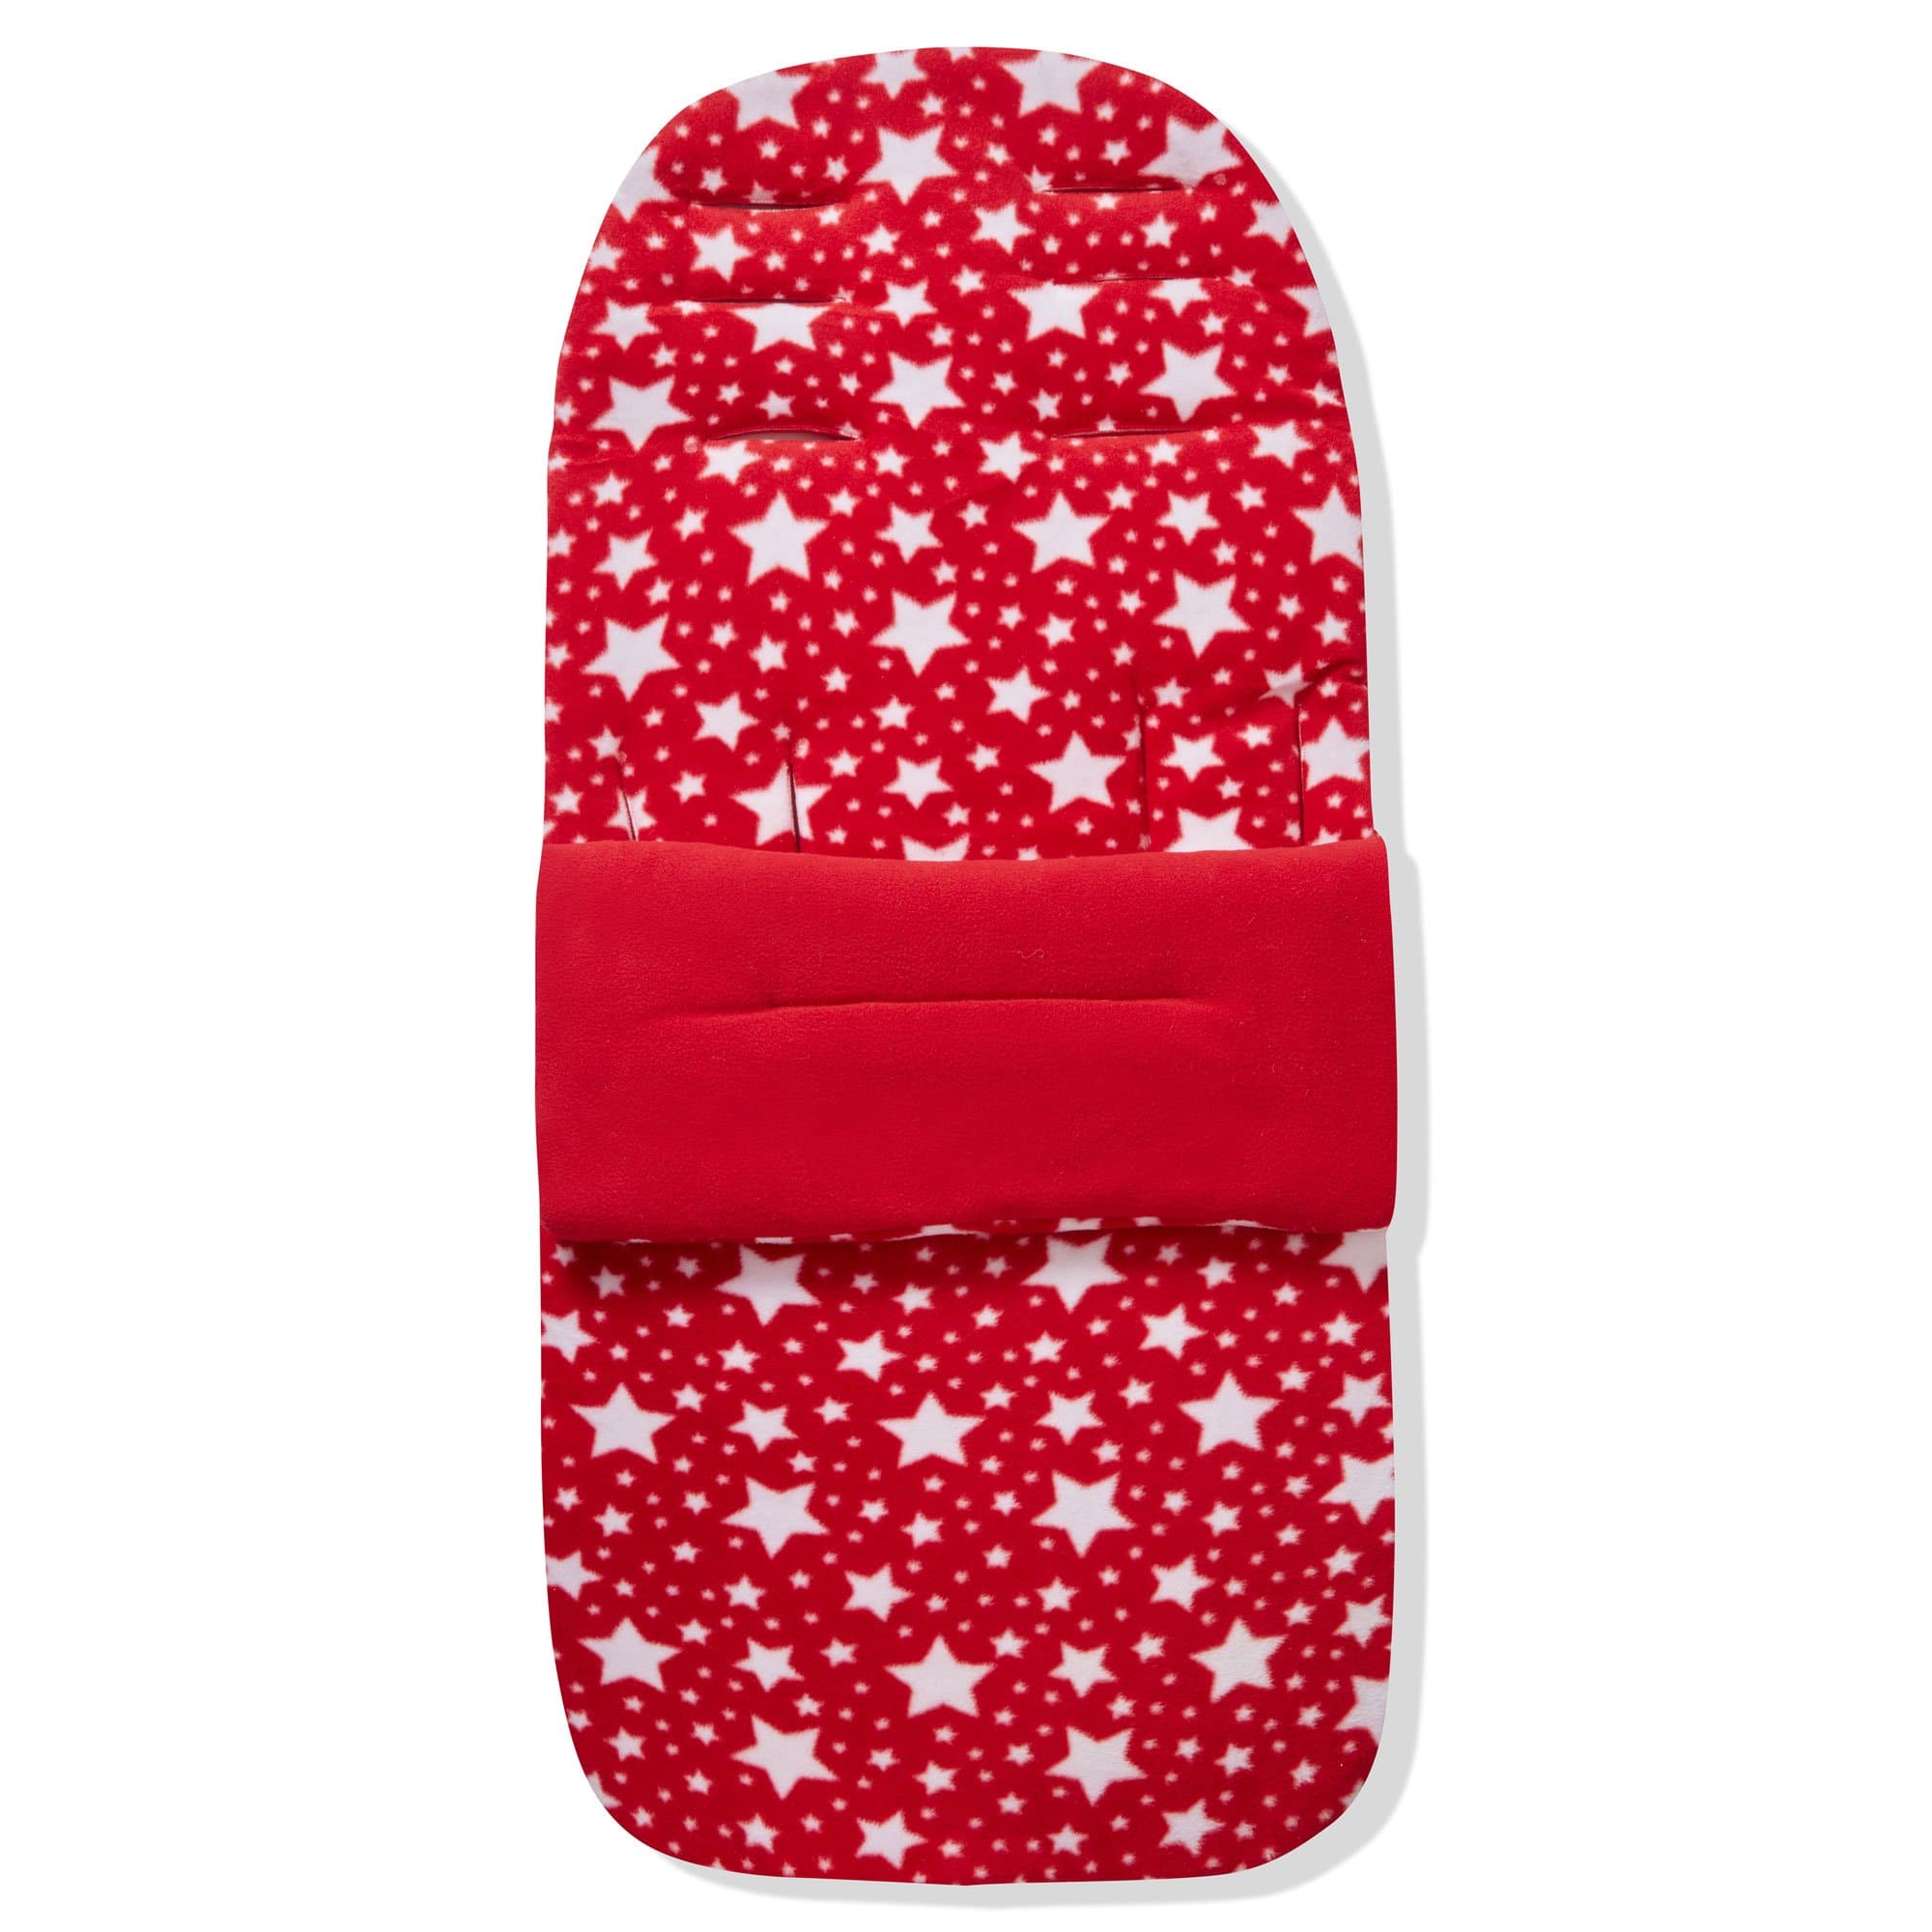 Fleece Footmuff / Cosy Toes Compatible with Red Castle - Red Star / Fits All Models | For Your Little One